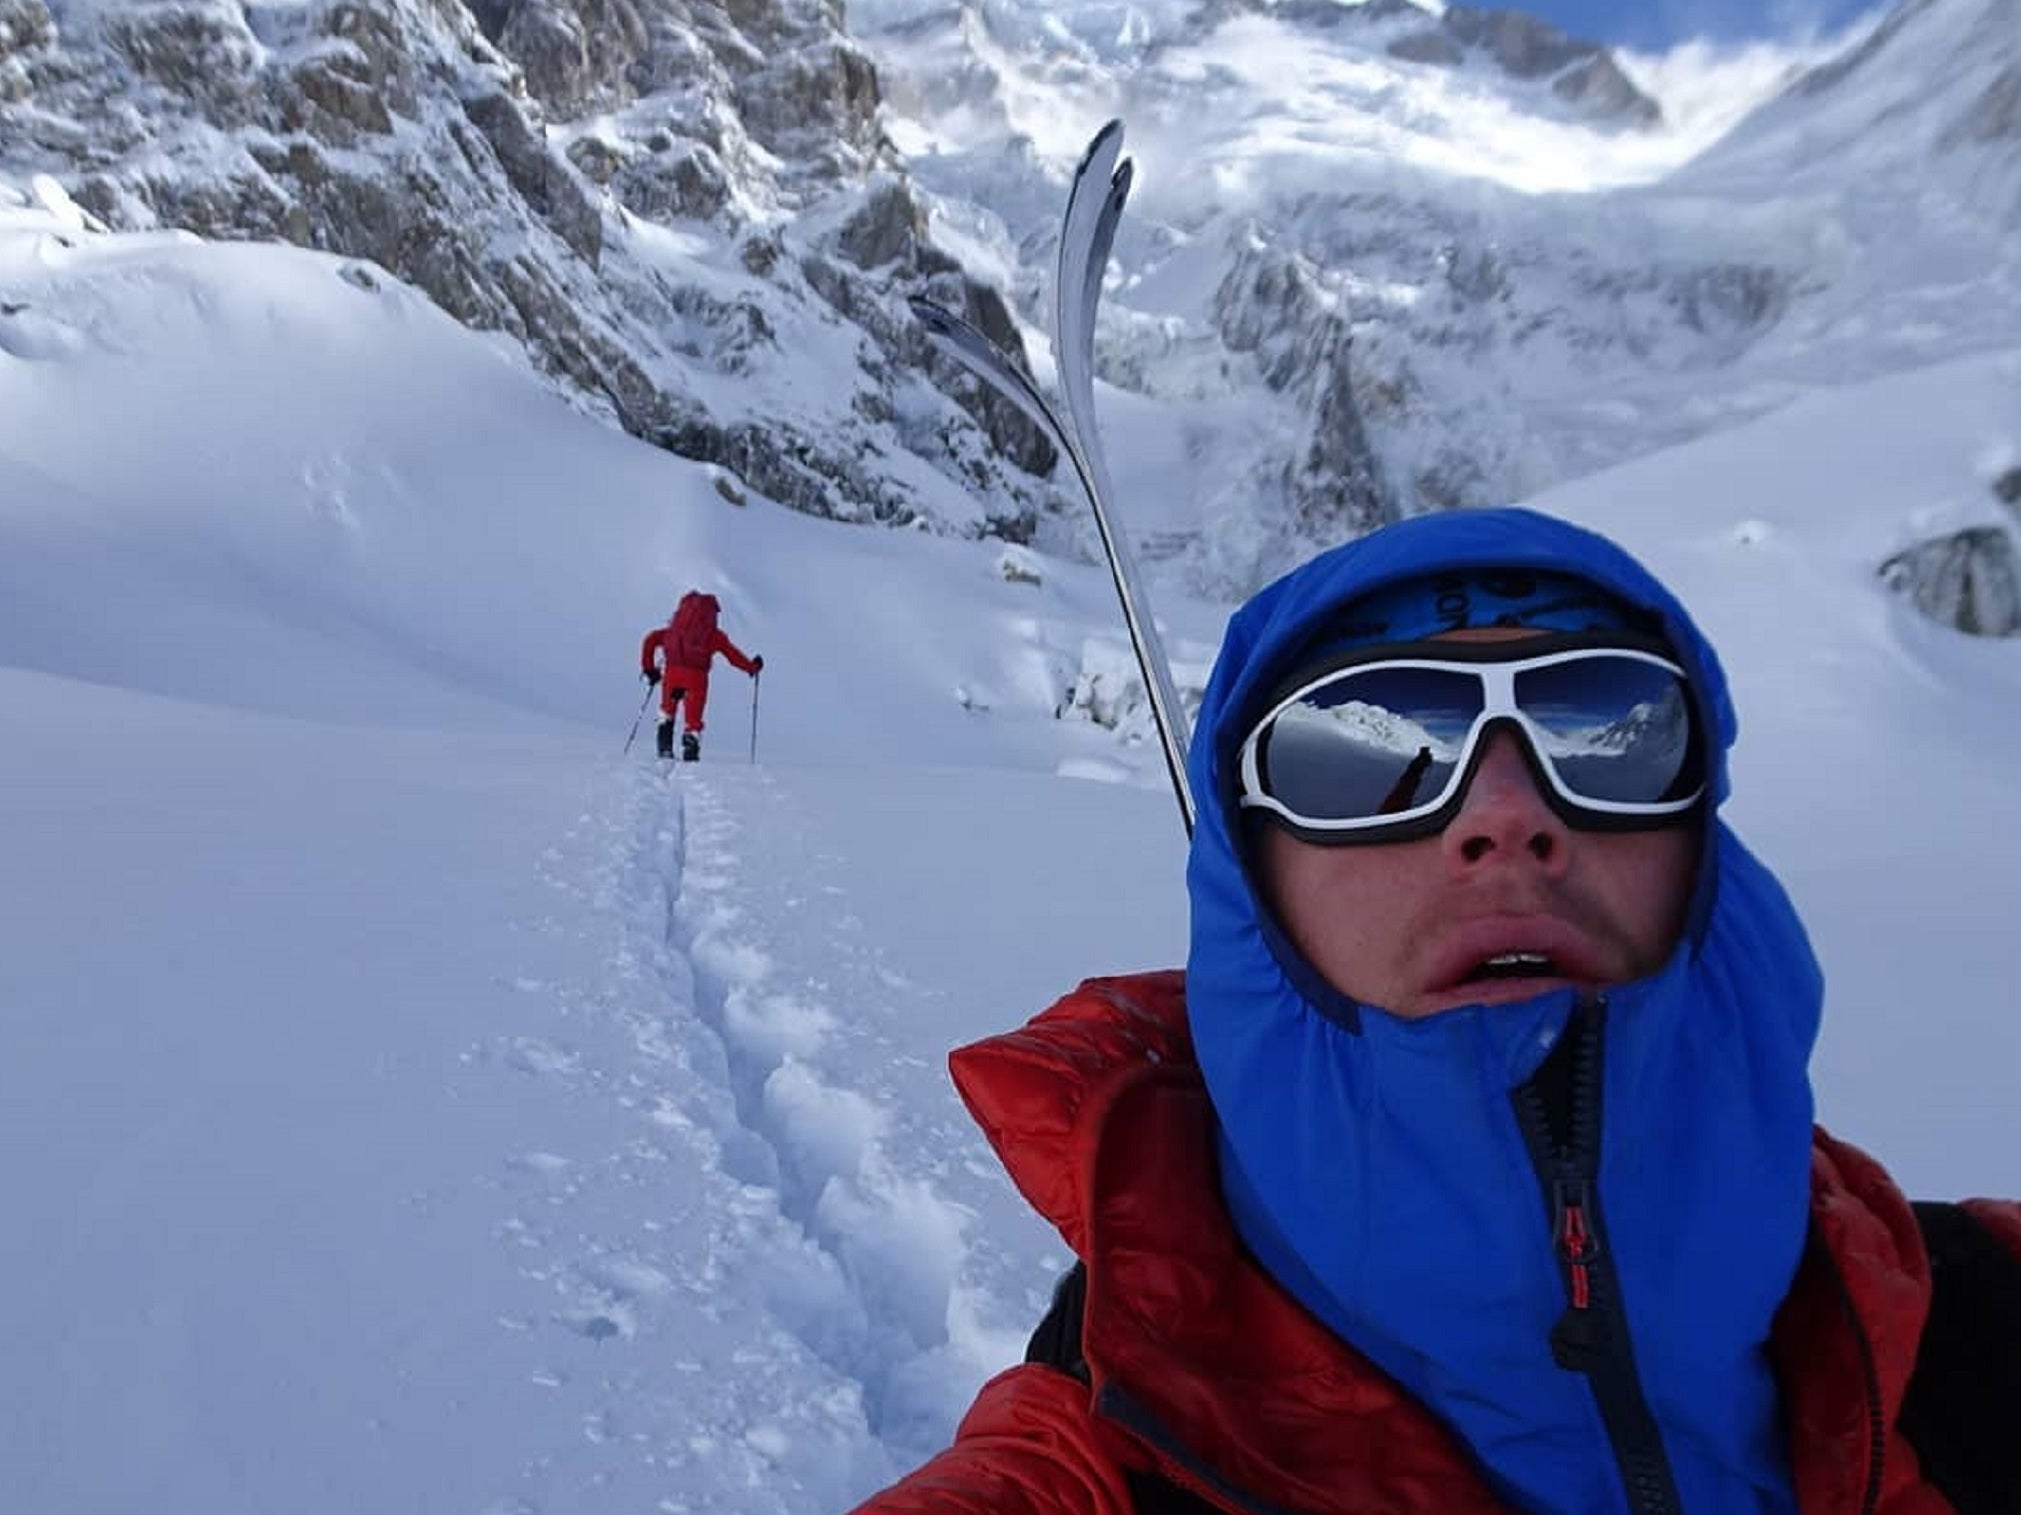 British climber Tom Ballard (pictured) and Italian Daniele Nardi have been missing on a notoriously dangerous mountain for a week